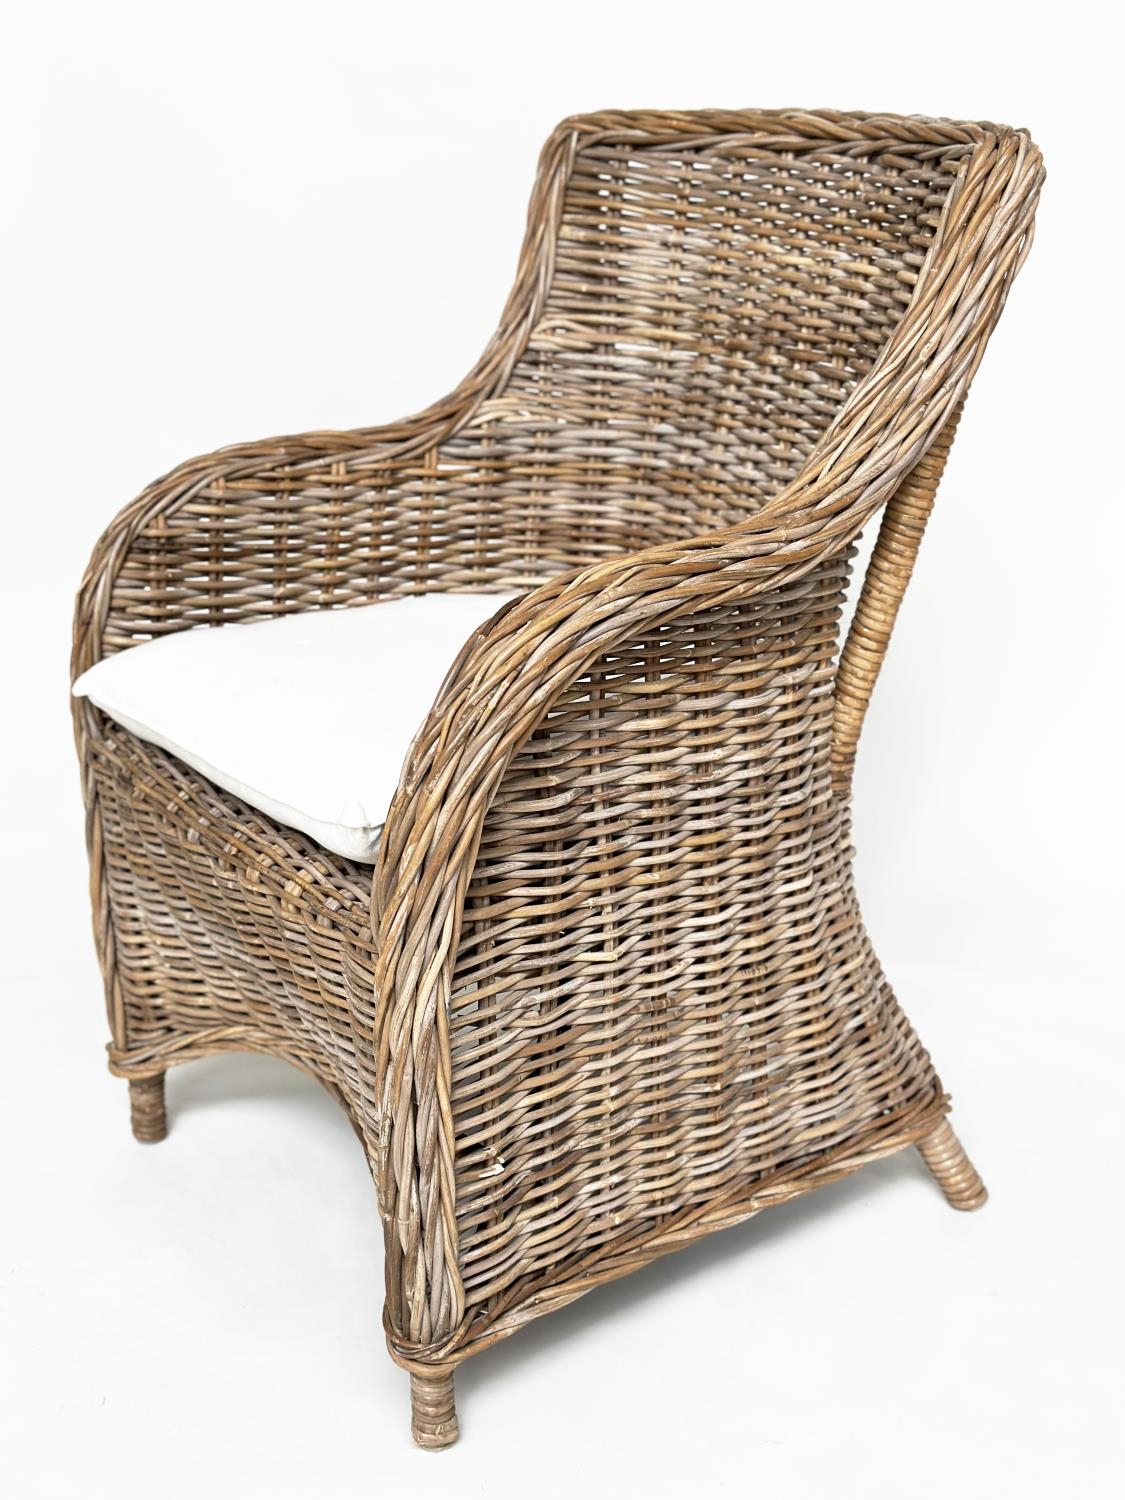 ORANGERY ARMCHAIRS, a pair, rattan framed and cane bound with cushions. (2) - Image 7 of 11